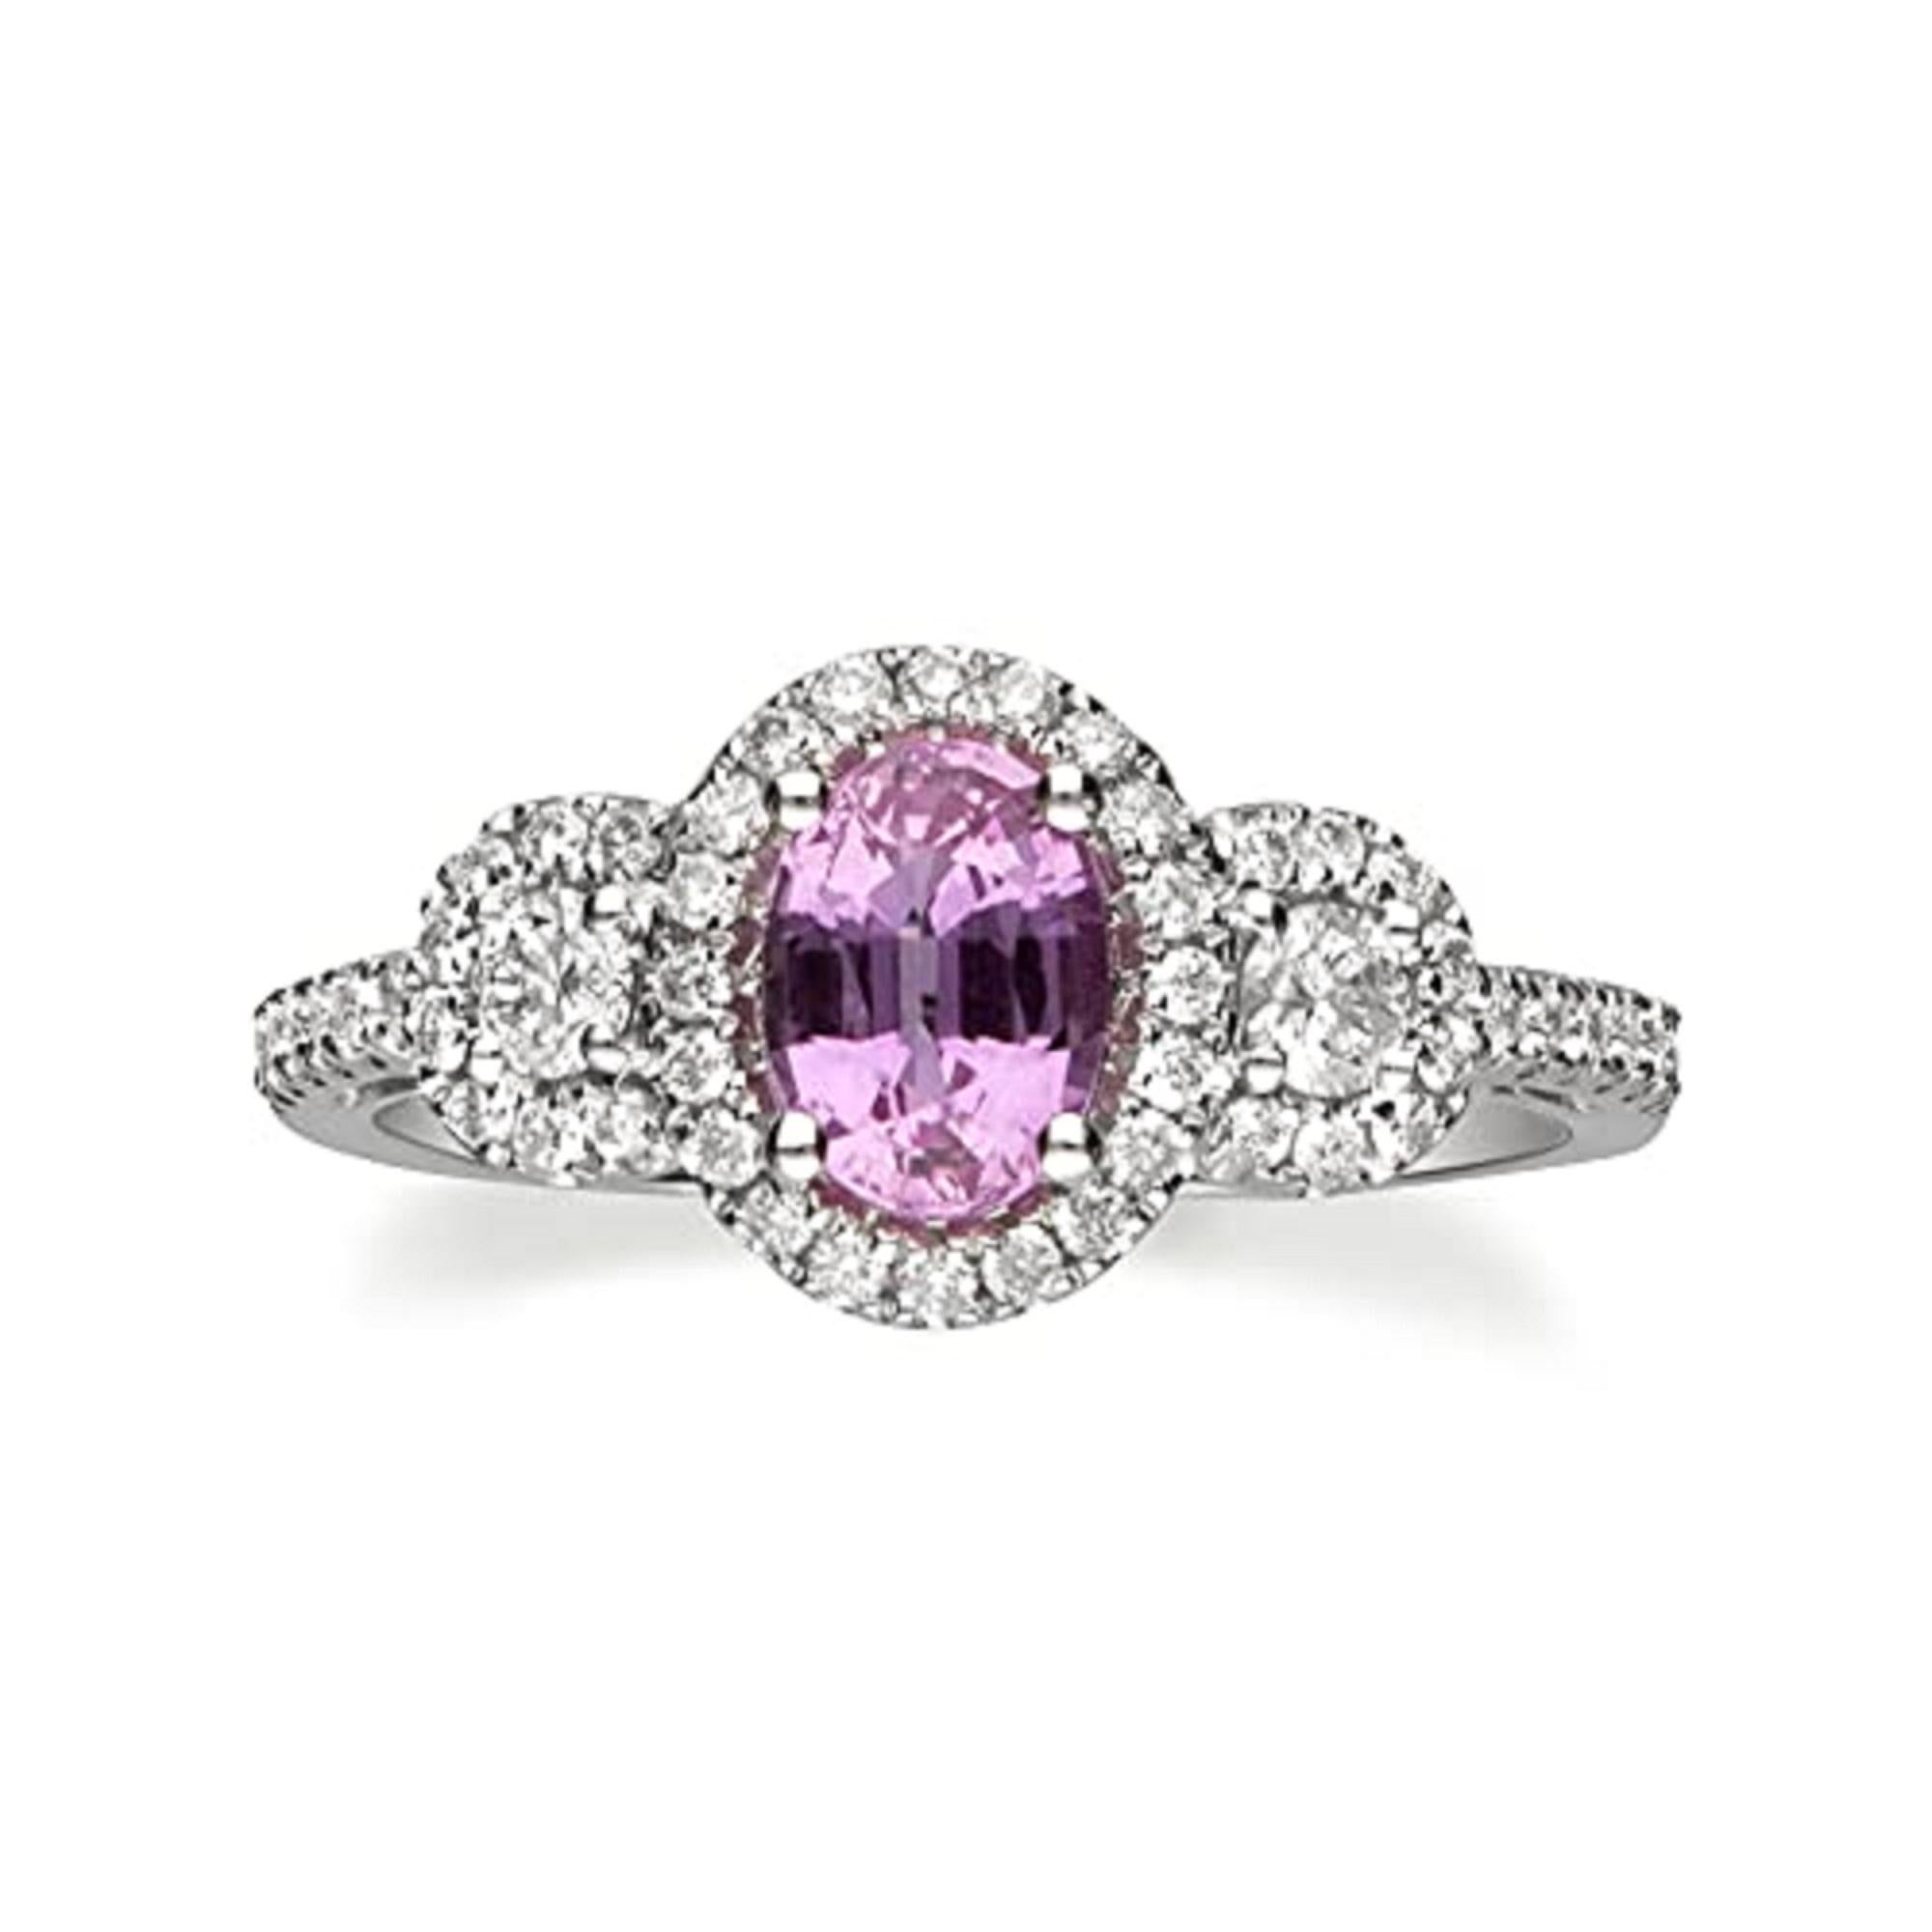 Gin and Grace 14K White Gold Pink Sapphire Ring with Diamonds for women